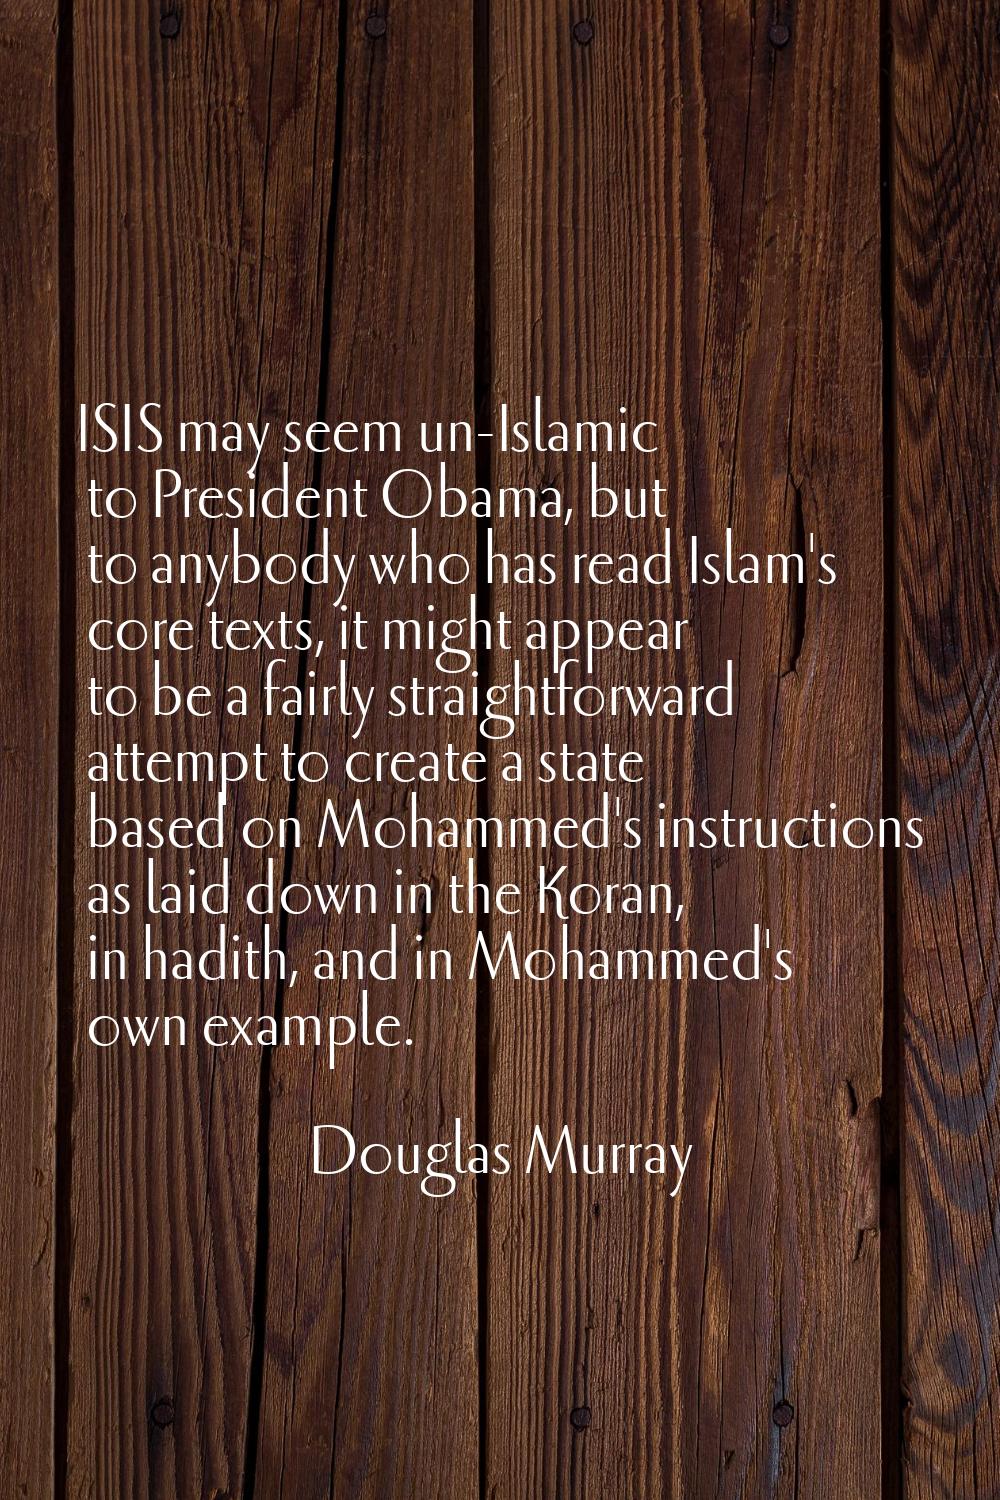 ISIS may seem un-Islamic to President Obama, but to anybody who has read Islam's core texts, it mig